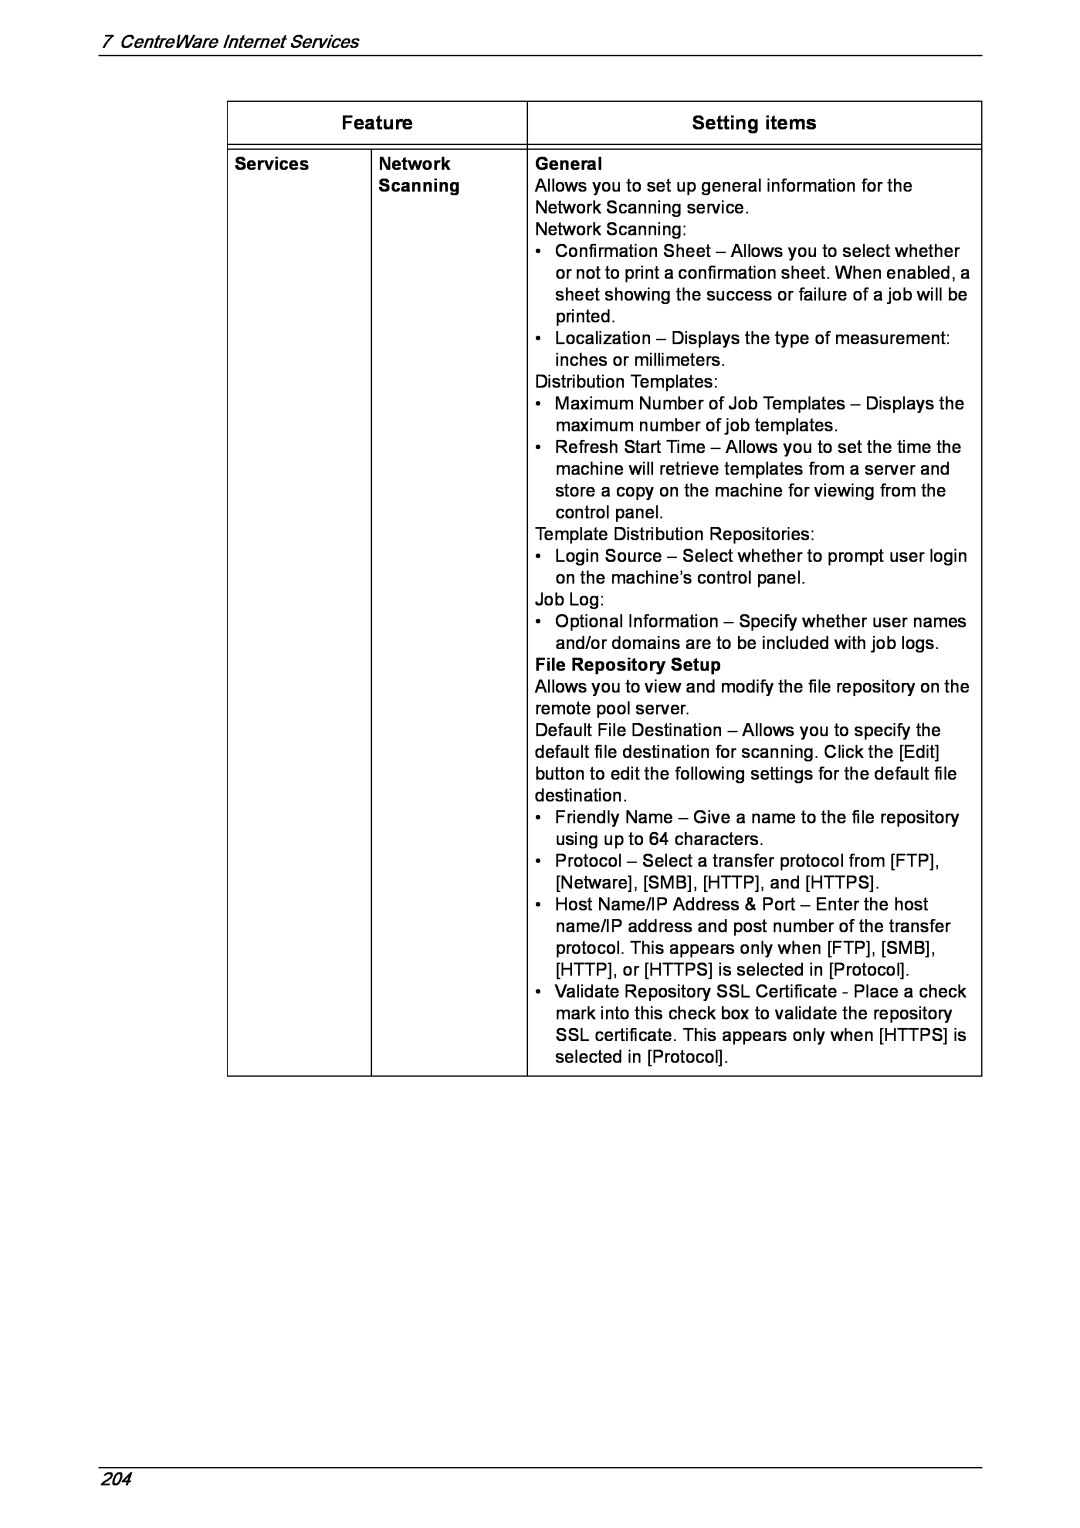 Xerox 5222 manual Feature, Setting items, Services, Network, General, Scanning, File Repository Setup 